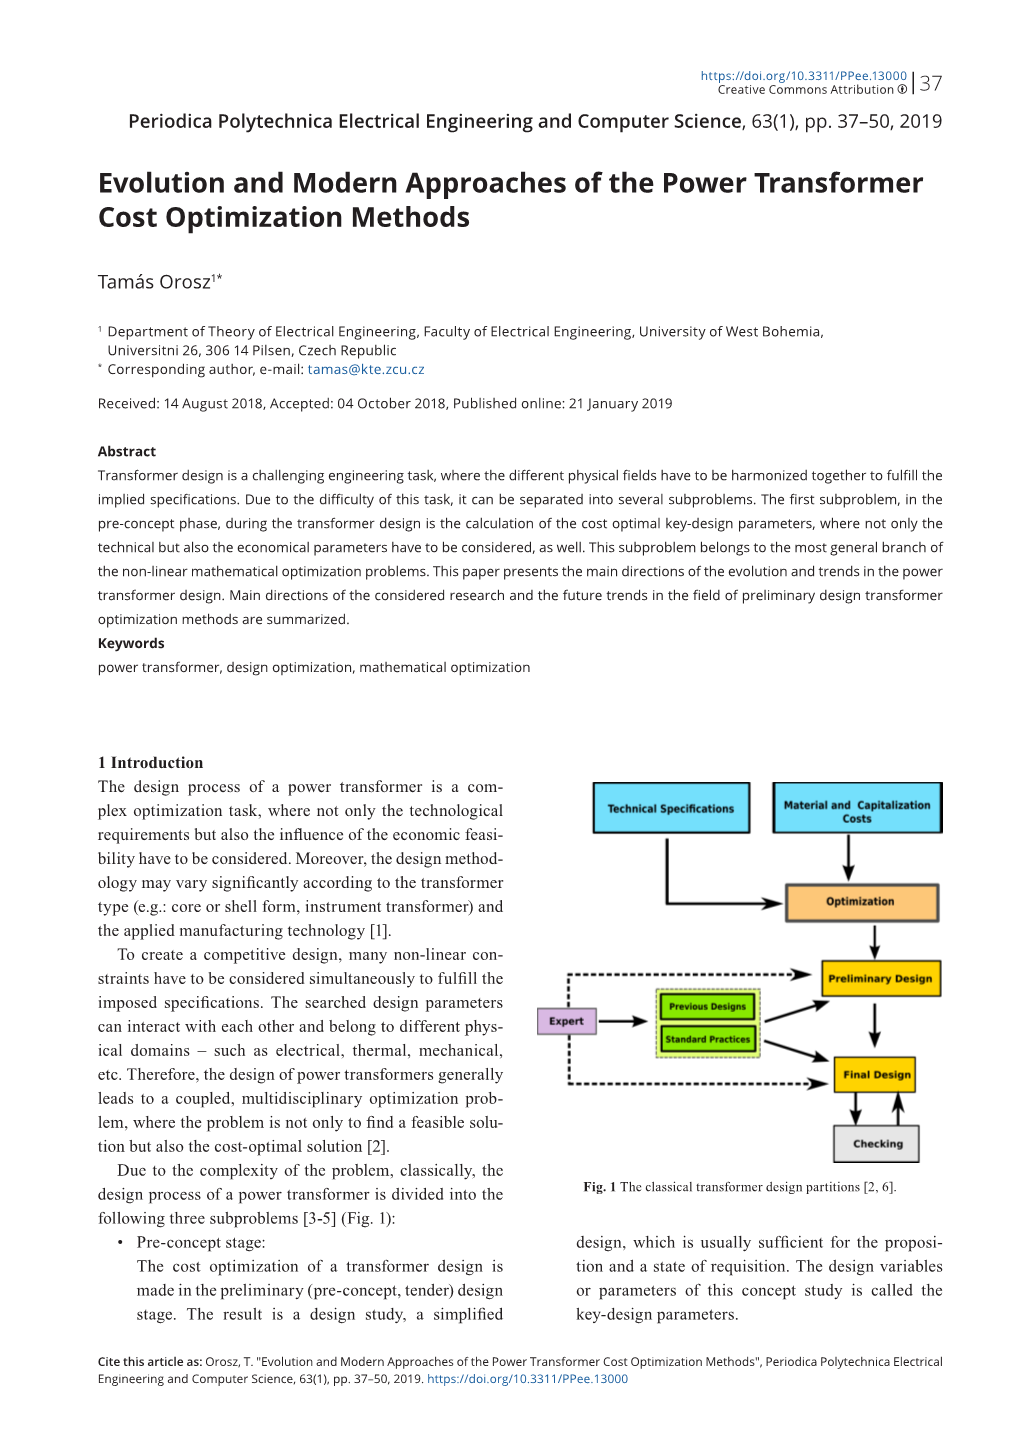 Evolution and Modern Approaches of the Power Transformer Cost Optimization Methods